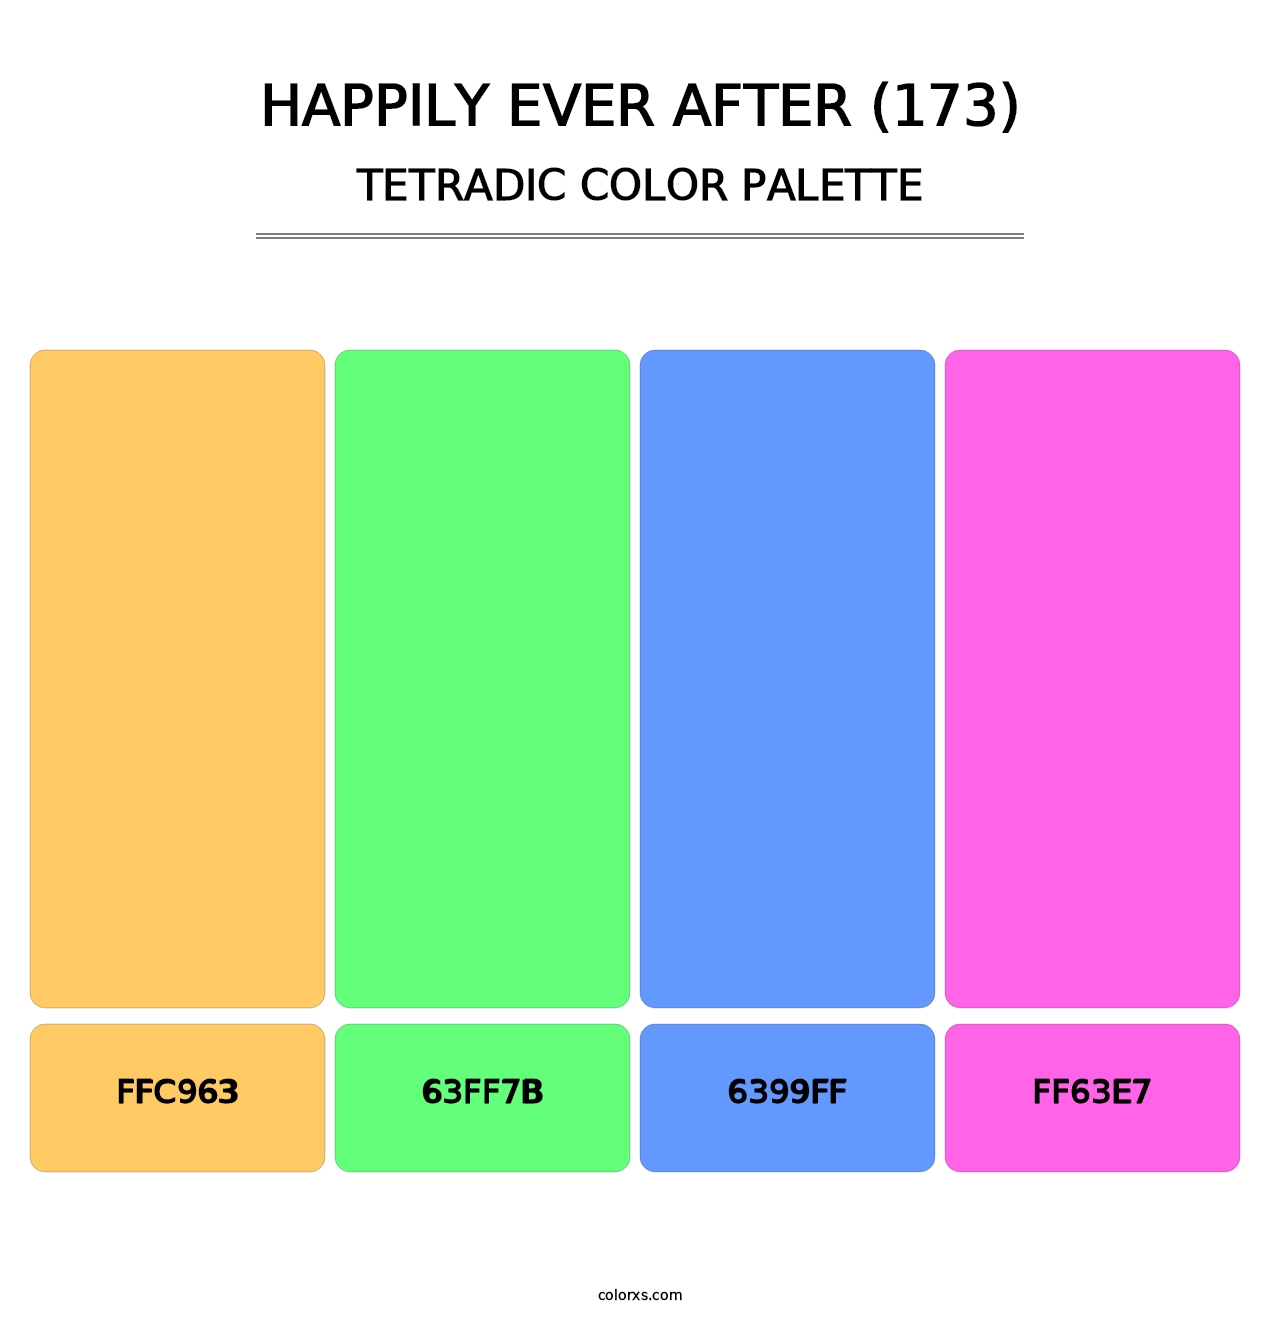 Happily Ever After (173) - Tetradic Color Palette